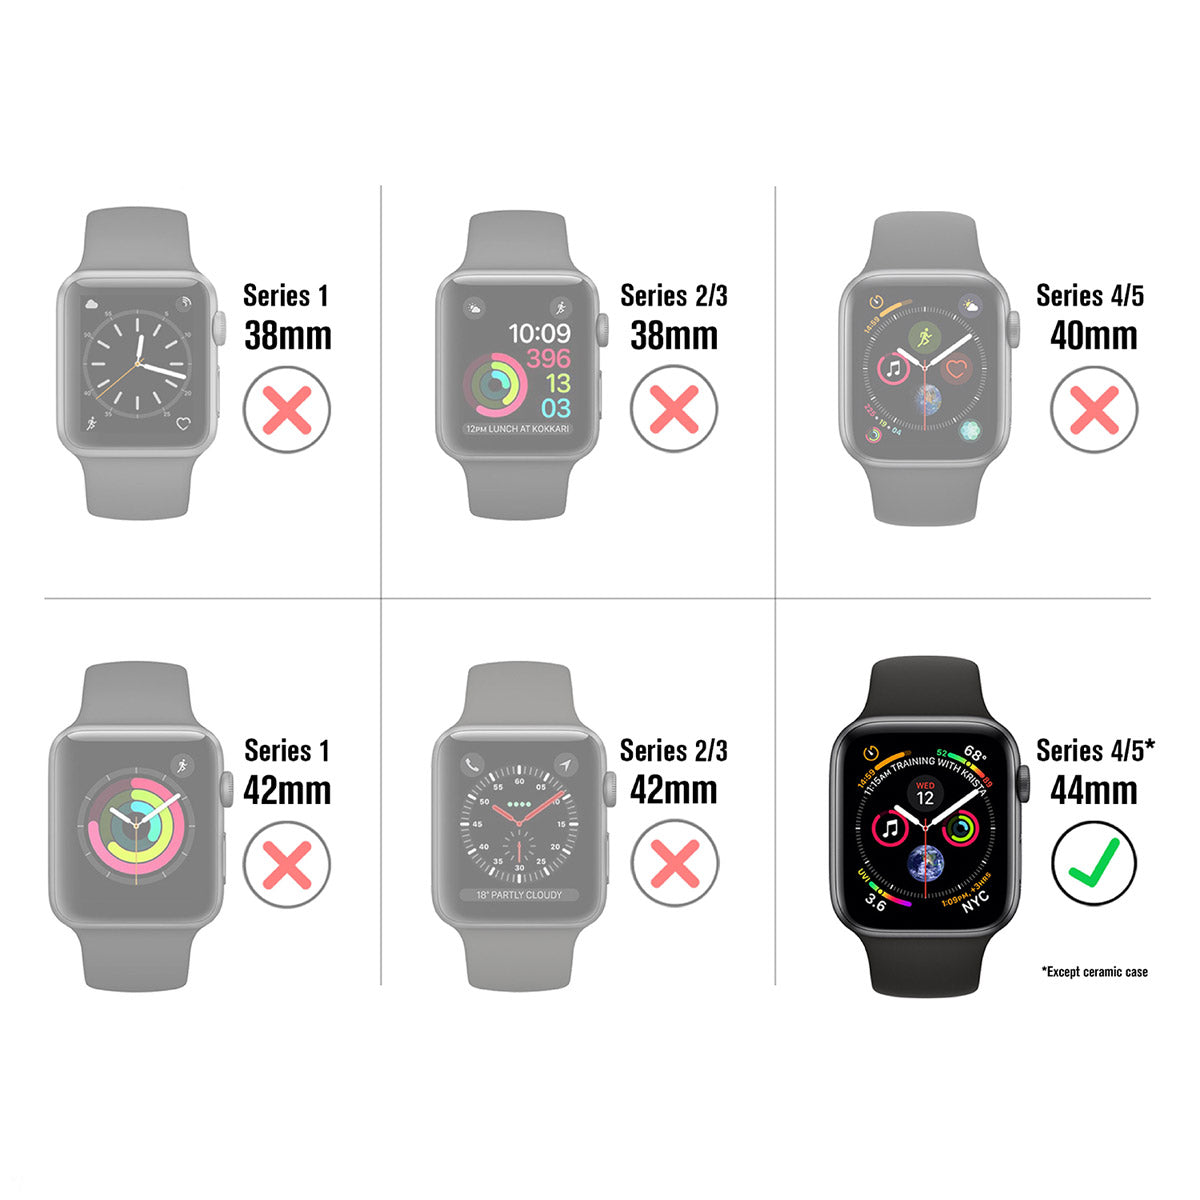 catalyst apple watch series 6 5 4 se gen 2 1 40mm 44mm waterproof case band showing different sizes of apple watch text reads series 1 38mm series 2/3 38mm series 4/5 40mm series 1 42mm series 2/3 42mm series 4/5* 44mm except ceramic case